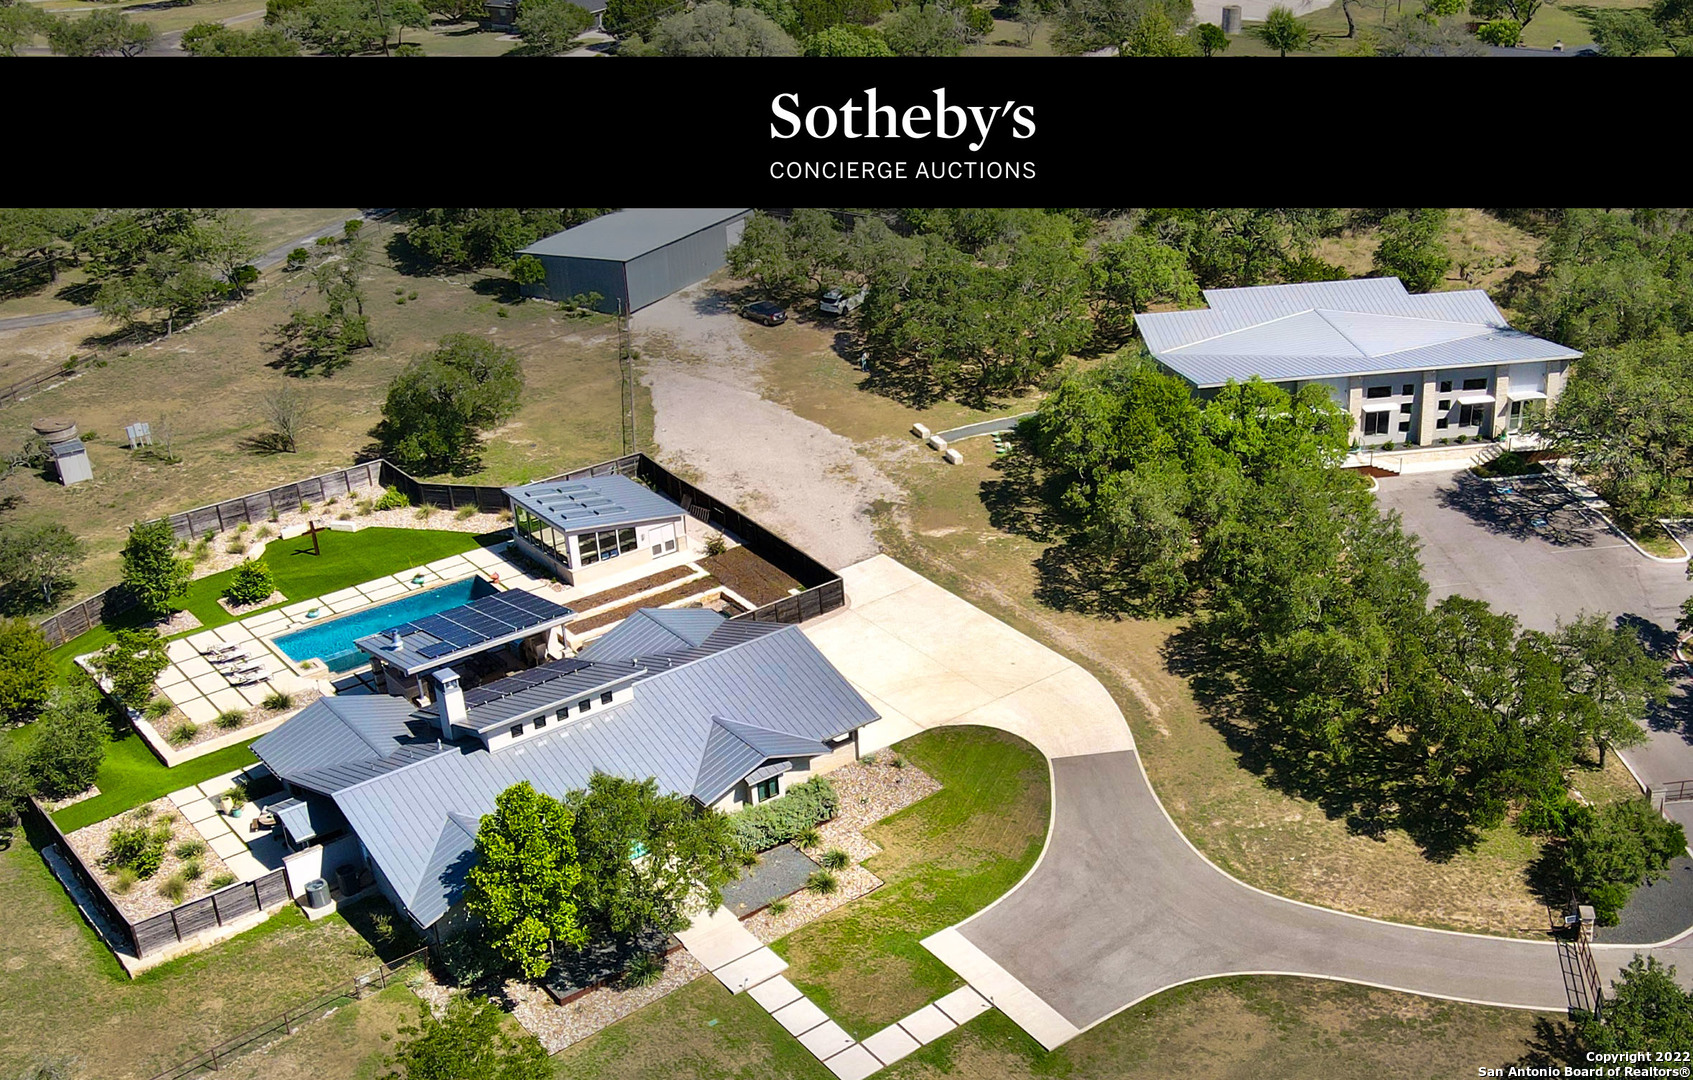 AUCTION: Bid Aug 26-31st August. Currently Listed for $4.5M. No Reserve. Showing Daily 1-4PM & By Appt    Located mere minutes from downtown Boerne's famous Hill Country Mile, 106 Sisterdale Road is a truly unique opportunity. This modern ranch home is custom-fitted with countless master crafted finishes and boasts its own state-of-the-art commercial/showroom on the property itself. Natural stone floors, custom-made lights, artisan plaster walls, and bespoke detailed woodwork throughout speak to the unmatched craftsmanship at every turn. The main house is ideal for entertaining. The bright chef's kitchen with concrete counters and ample room to gather opens to the indoor living space, transitioning in turn to the spectacular outdoor entertaining space. Verdant lawns meet a sprawling patio, surrounding a turquoise pool that invites you to soak the day away. Outdoors, a separate gated entrance and parking area ensure convenient access to all amenities. The showroom, currently operating as a Pilates studio, is fitted with every feature for turnkey takeover: insulated concrete walls, LED lighting, a full water catchment system, custom locker rooms, kitchen with laundry, and private offices await within. Ideal for a studio, gallery, or an at-home office or retail space, the area allows for flexible-use to live and work in modern luxury. With potential for the transformation or addition of a guest house or staff quarters, you can create the ultimate family compound or a world-class equestrian estate as the nearly 4-acre property offers a desirable blend of commercial and residential possibilities.